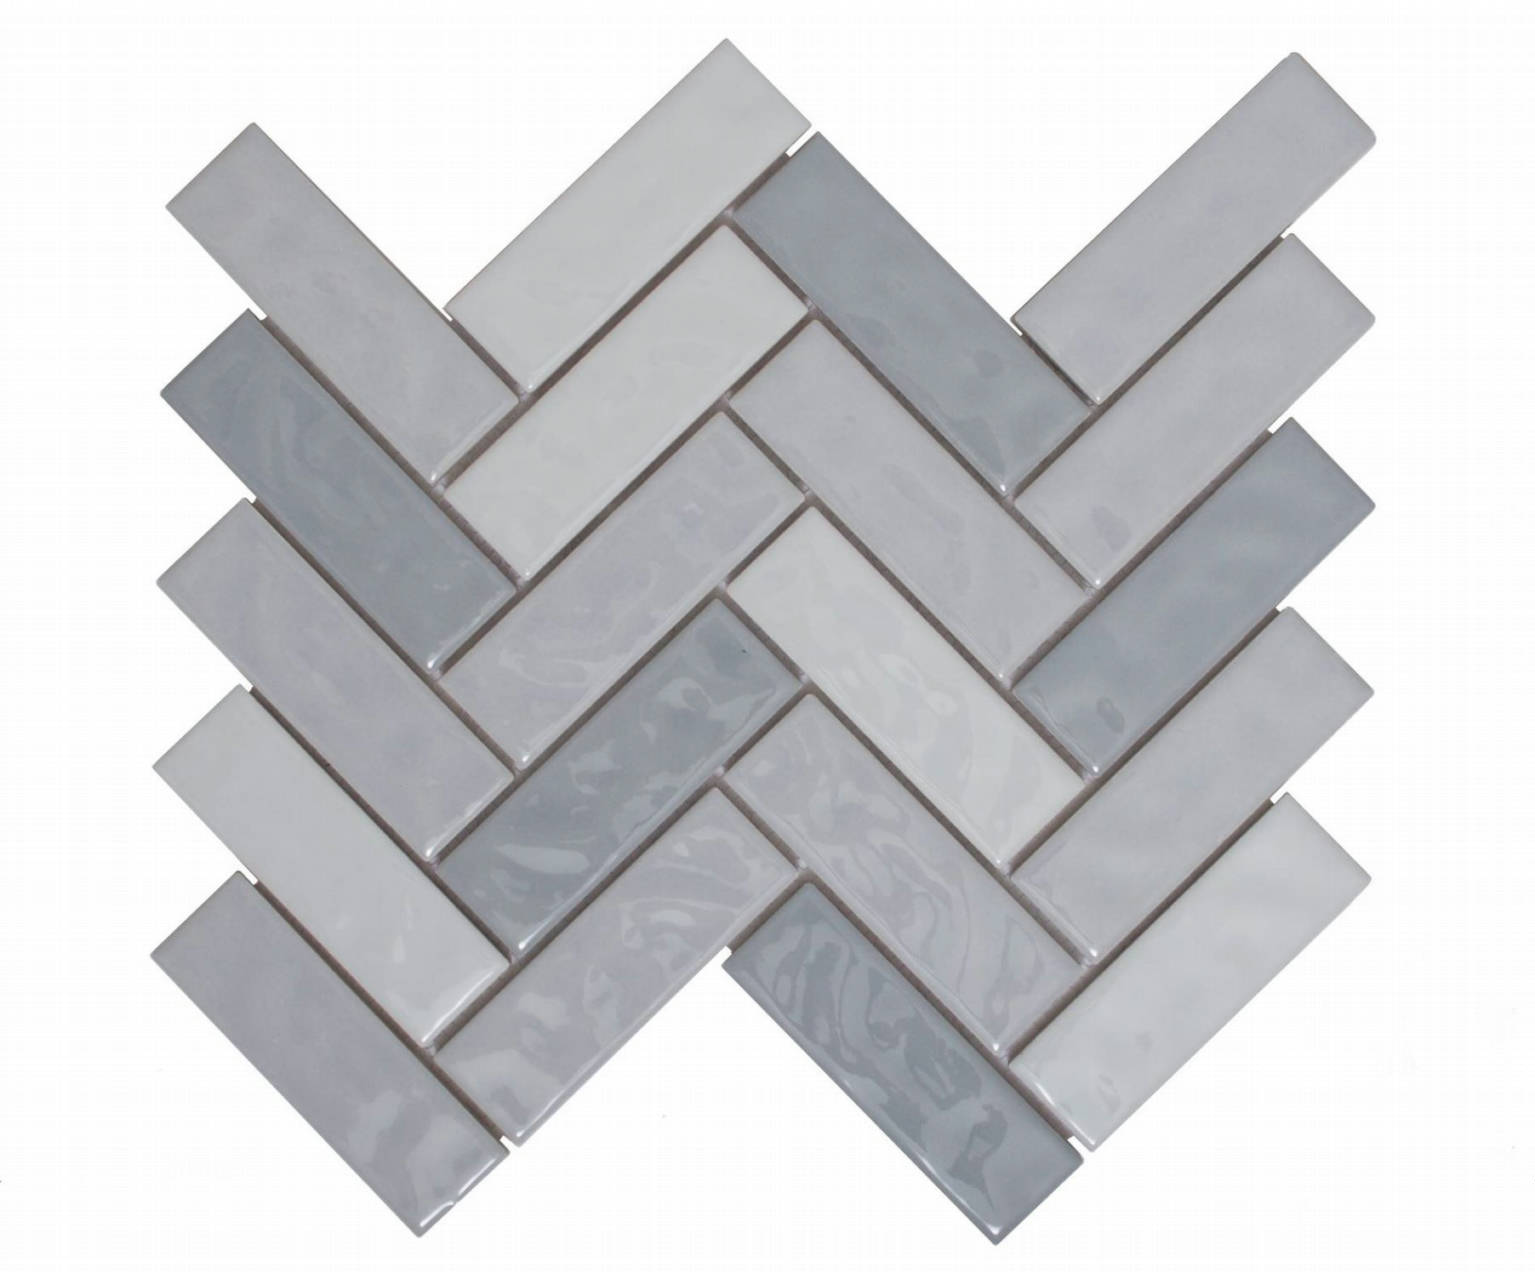 QS1B-101112 | Stones & More | Finest selection of Mosaics, Glass, Tile and Stone